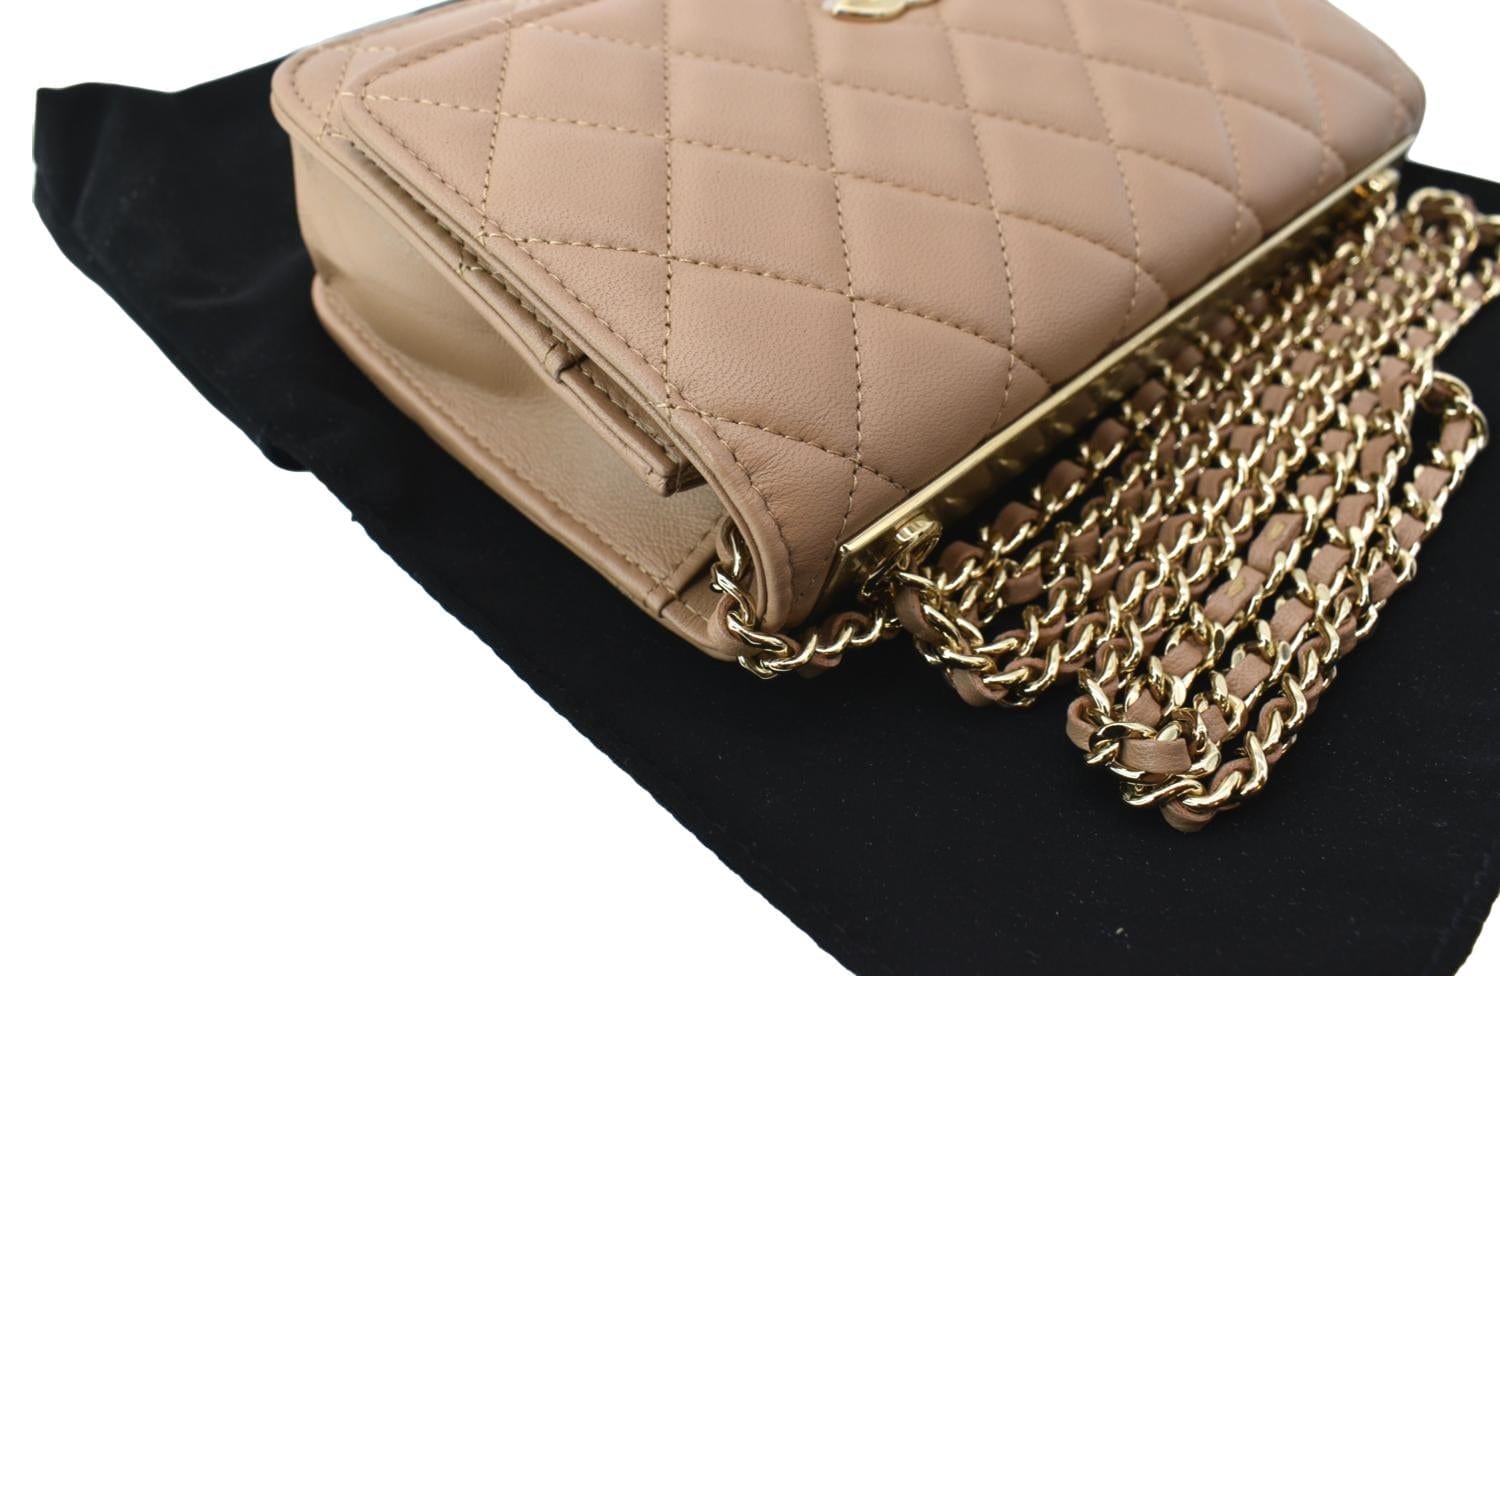 Chanel Wallet on Chain in Brown Caviar - New in Box - The Consignment Cafe